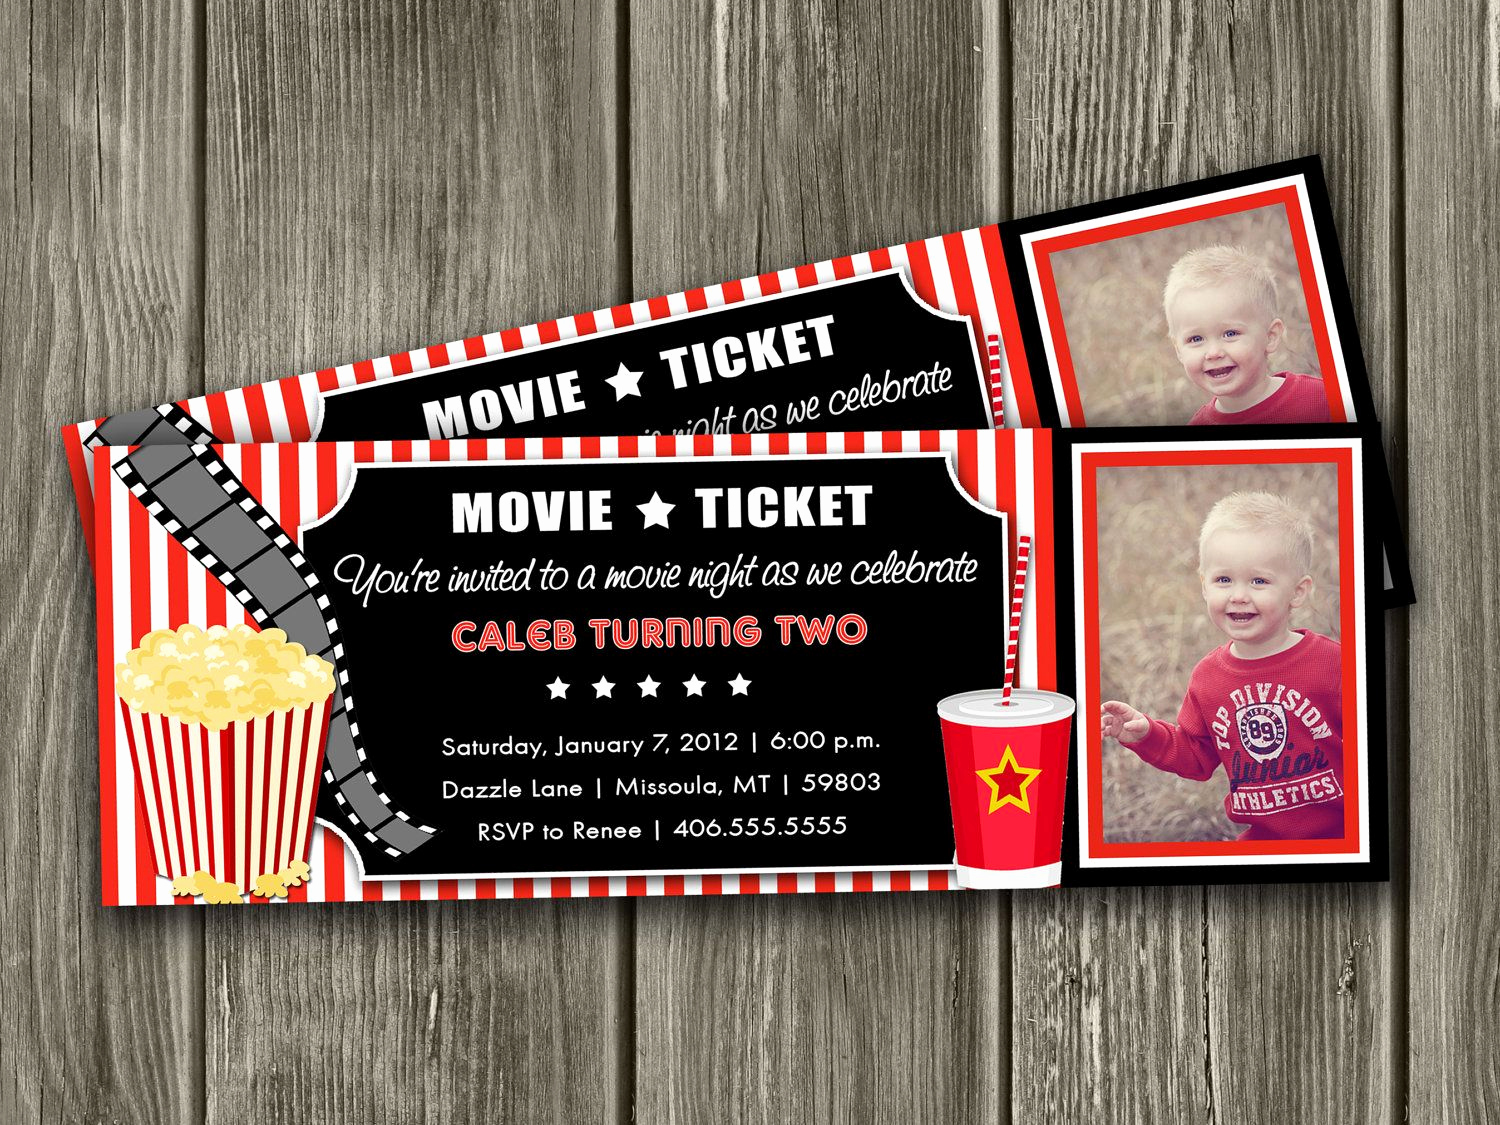 Movie Ticket Party Invitation Inspirational Movie Ticket Invitation Free Thank You Card by